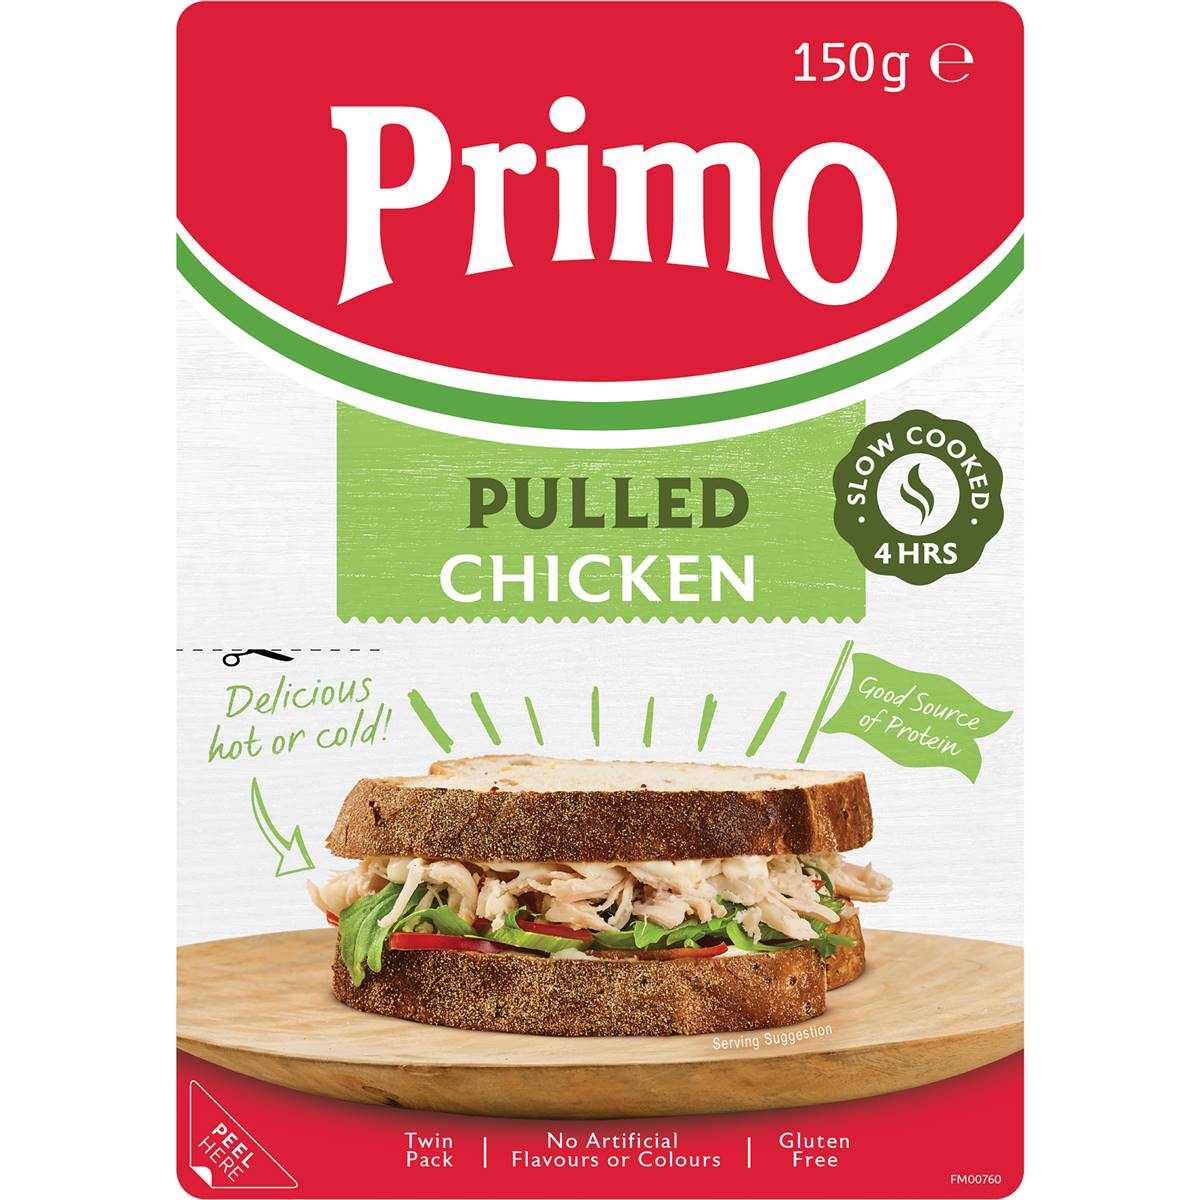 Primo Pulled Chicken 150g